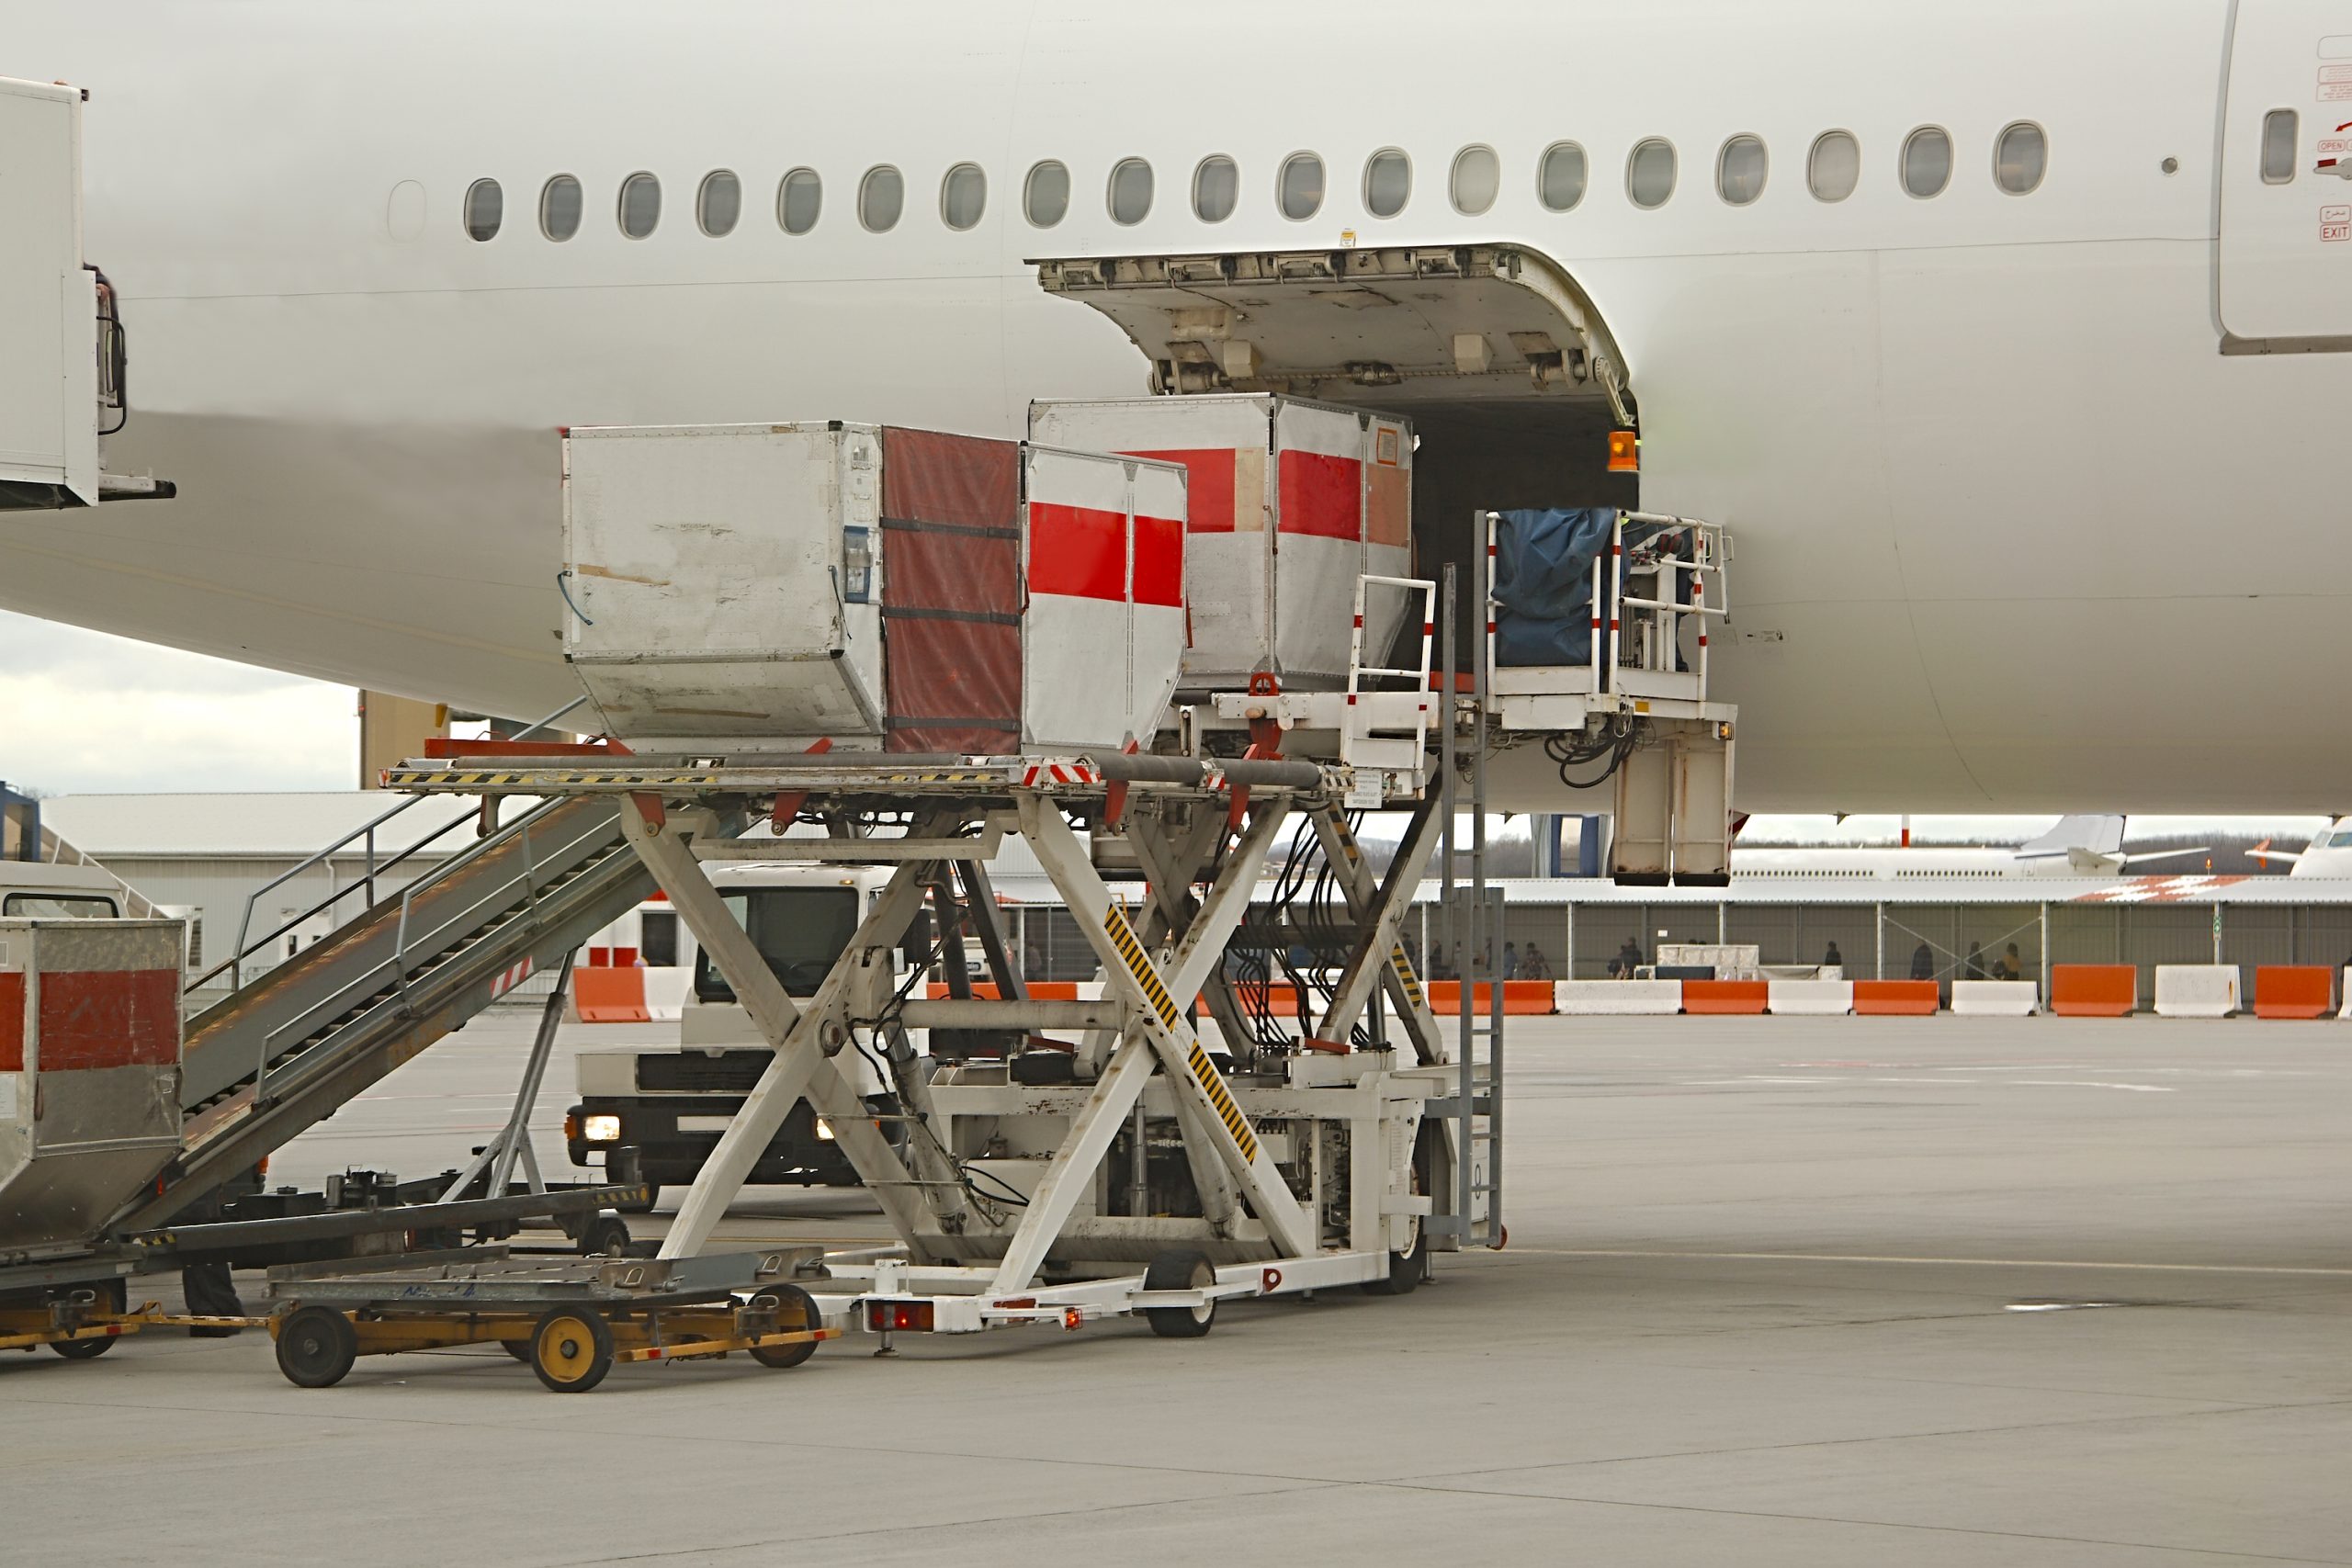 Loading cargo containers into an airliner